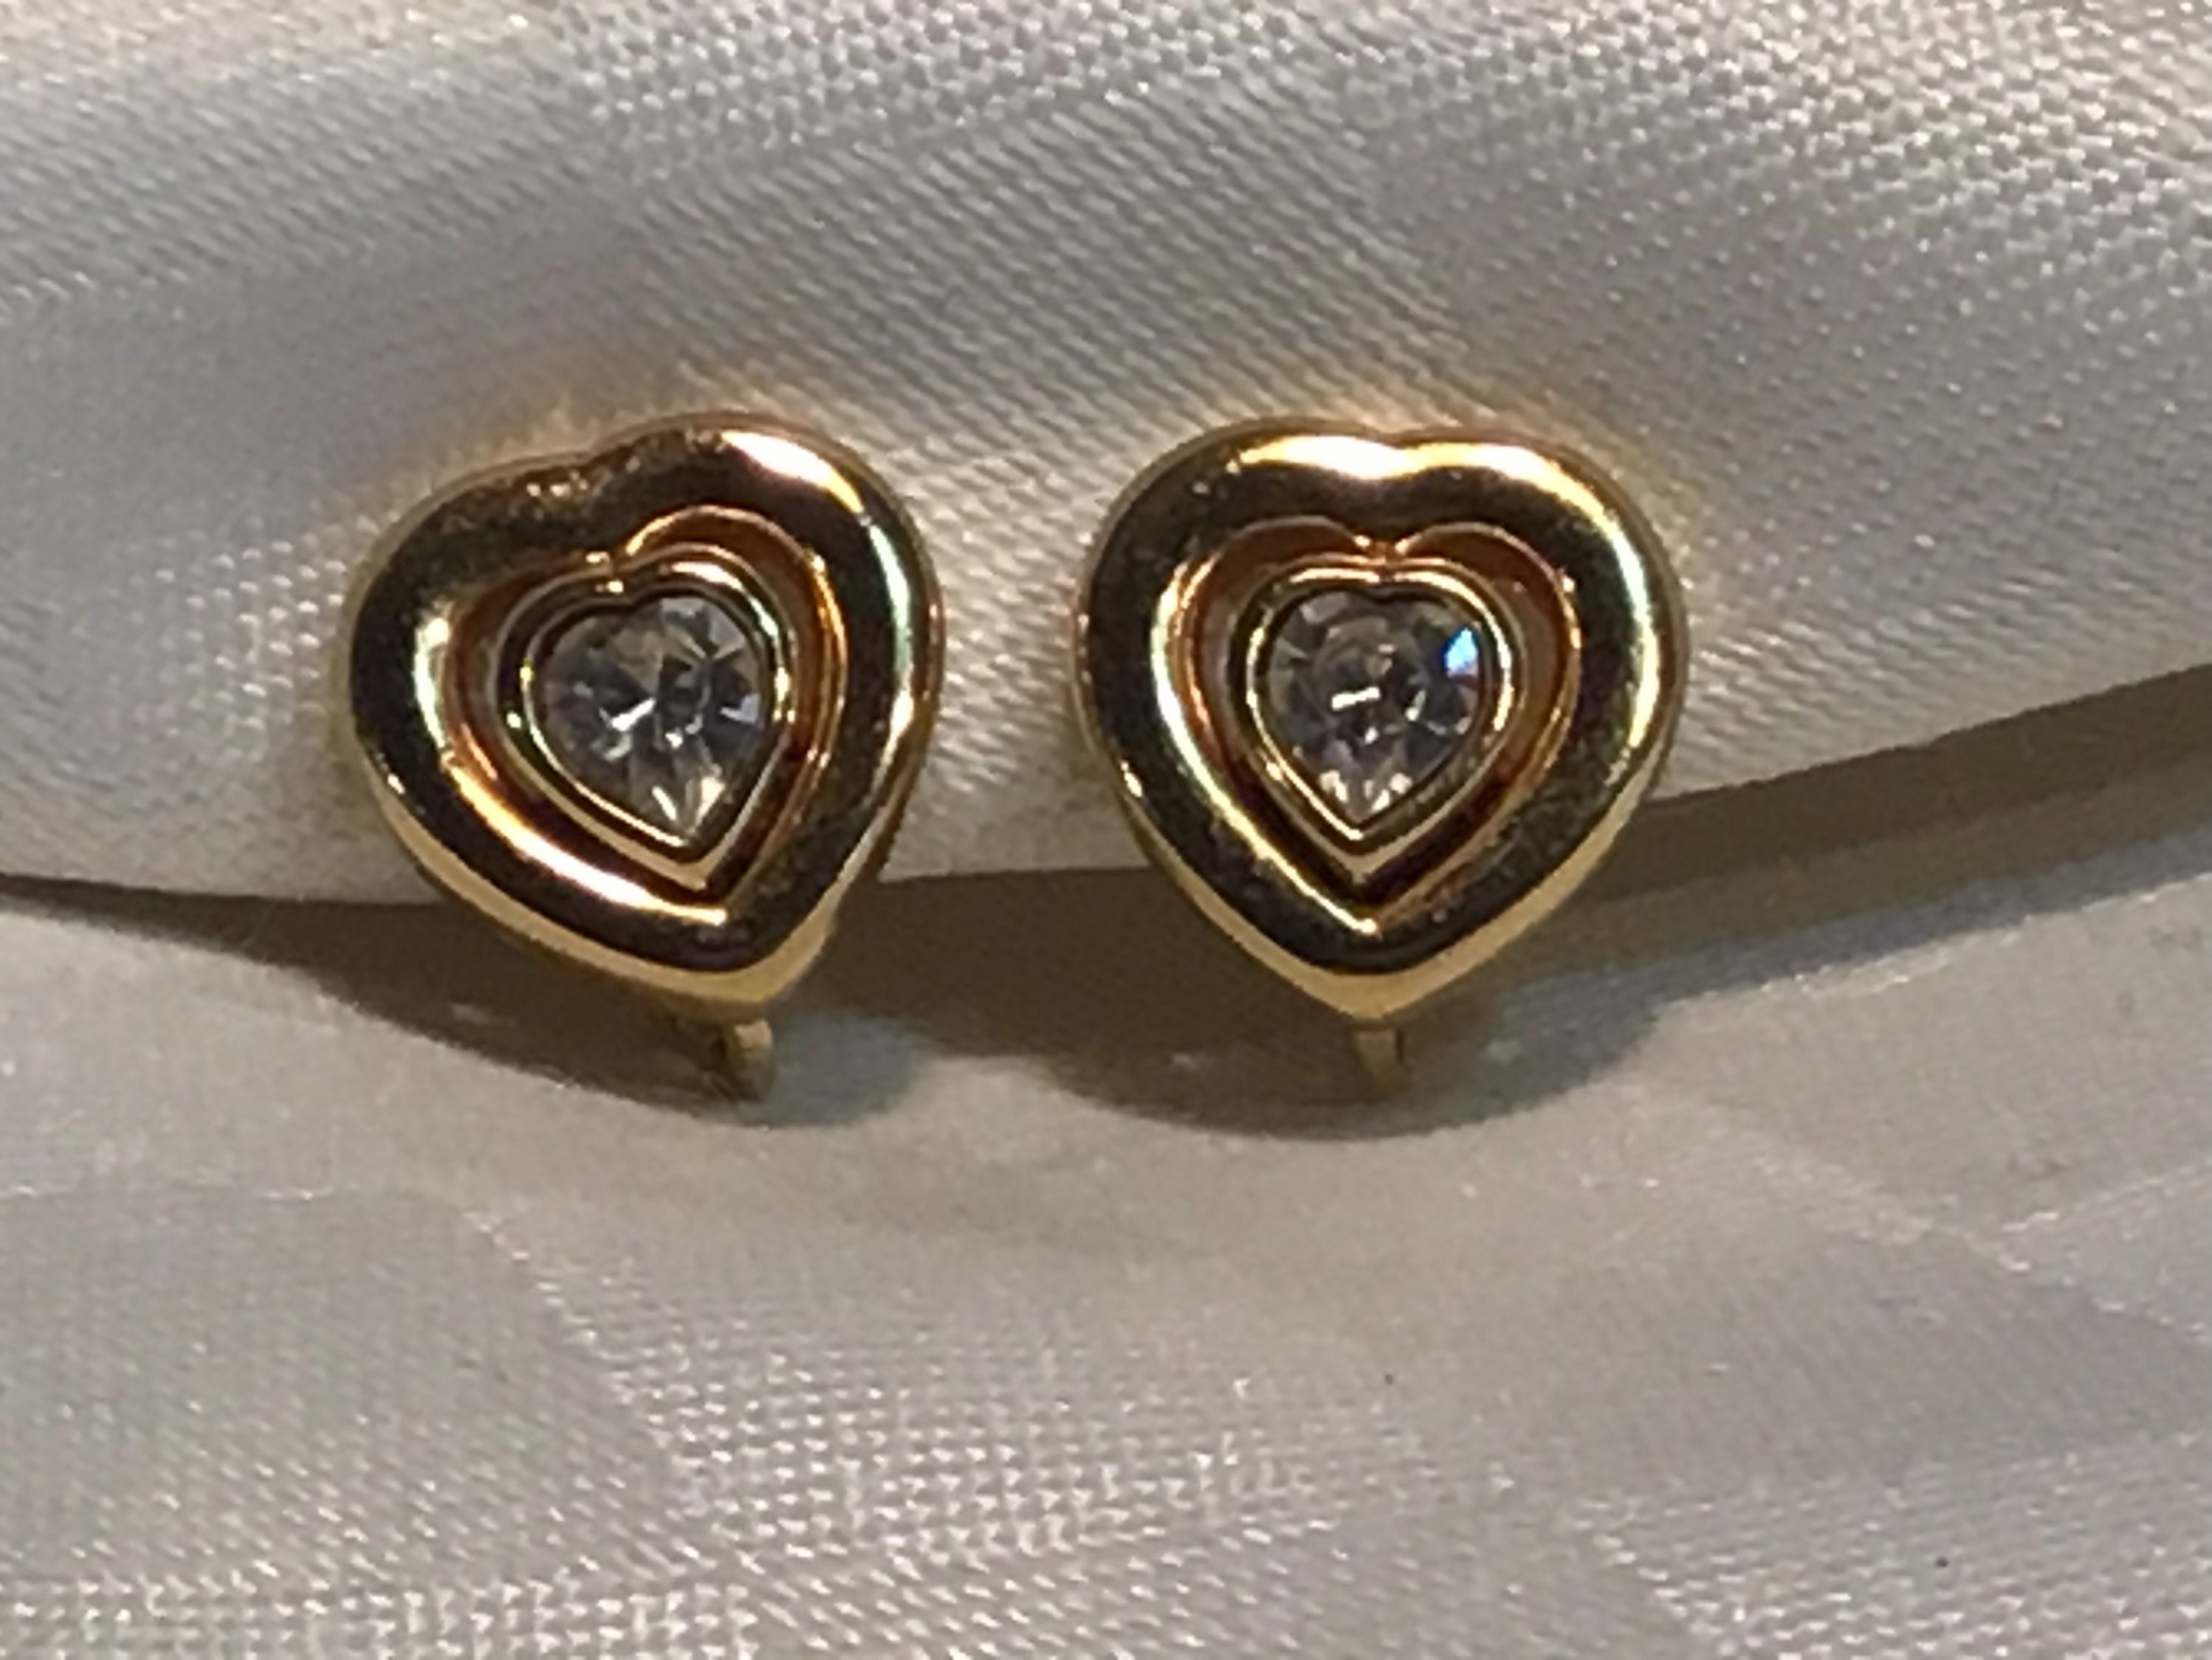 From Courreges Paris. Stunning Heart-shaped Golden Metal Ear - Etsy